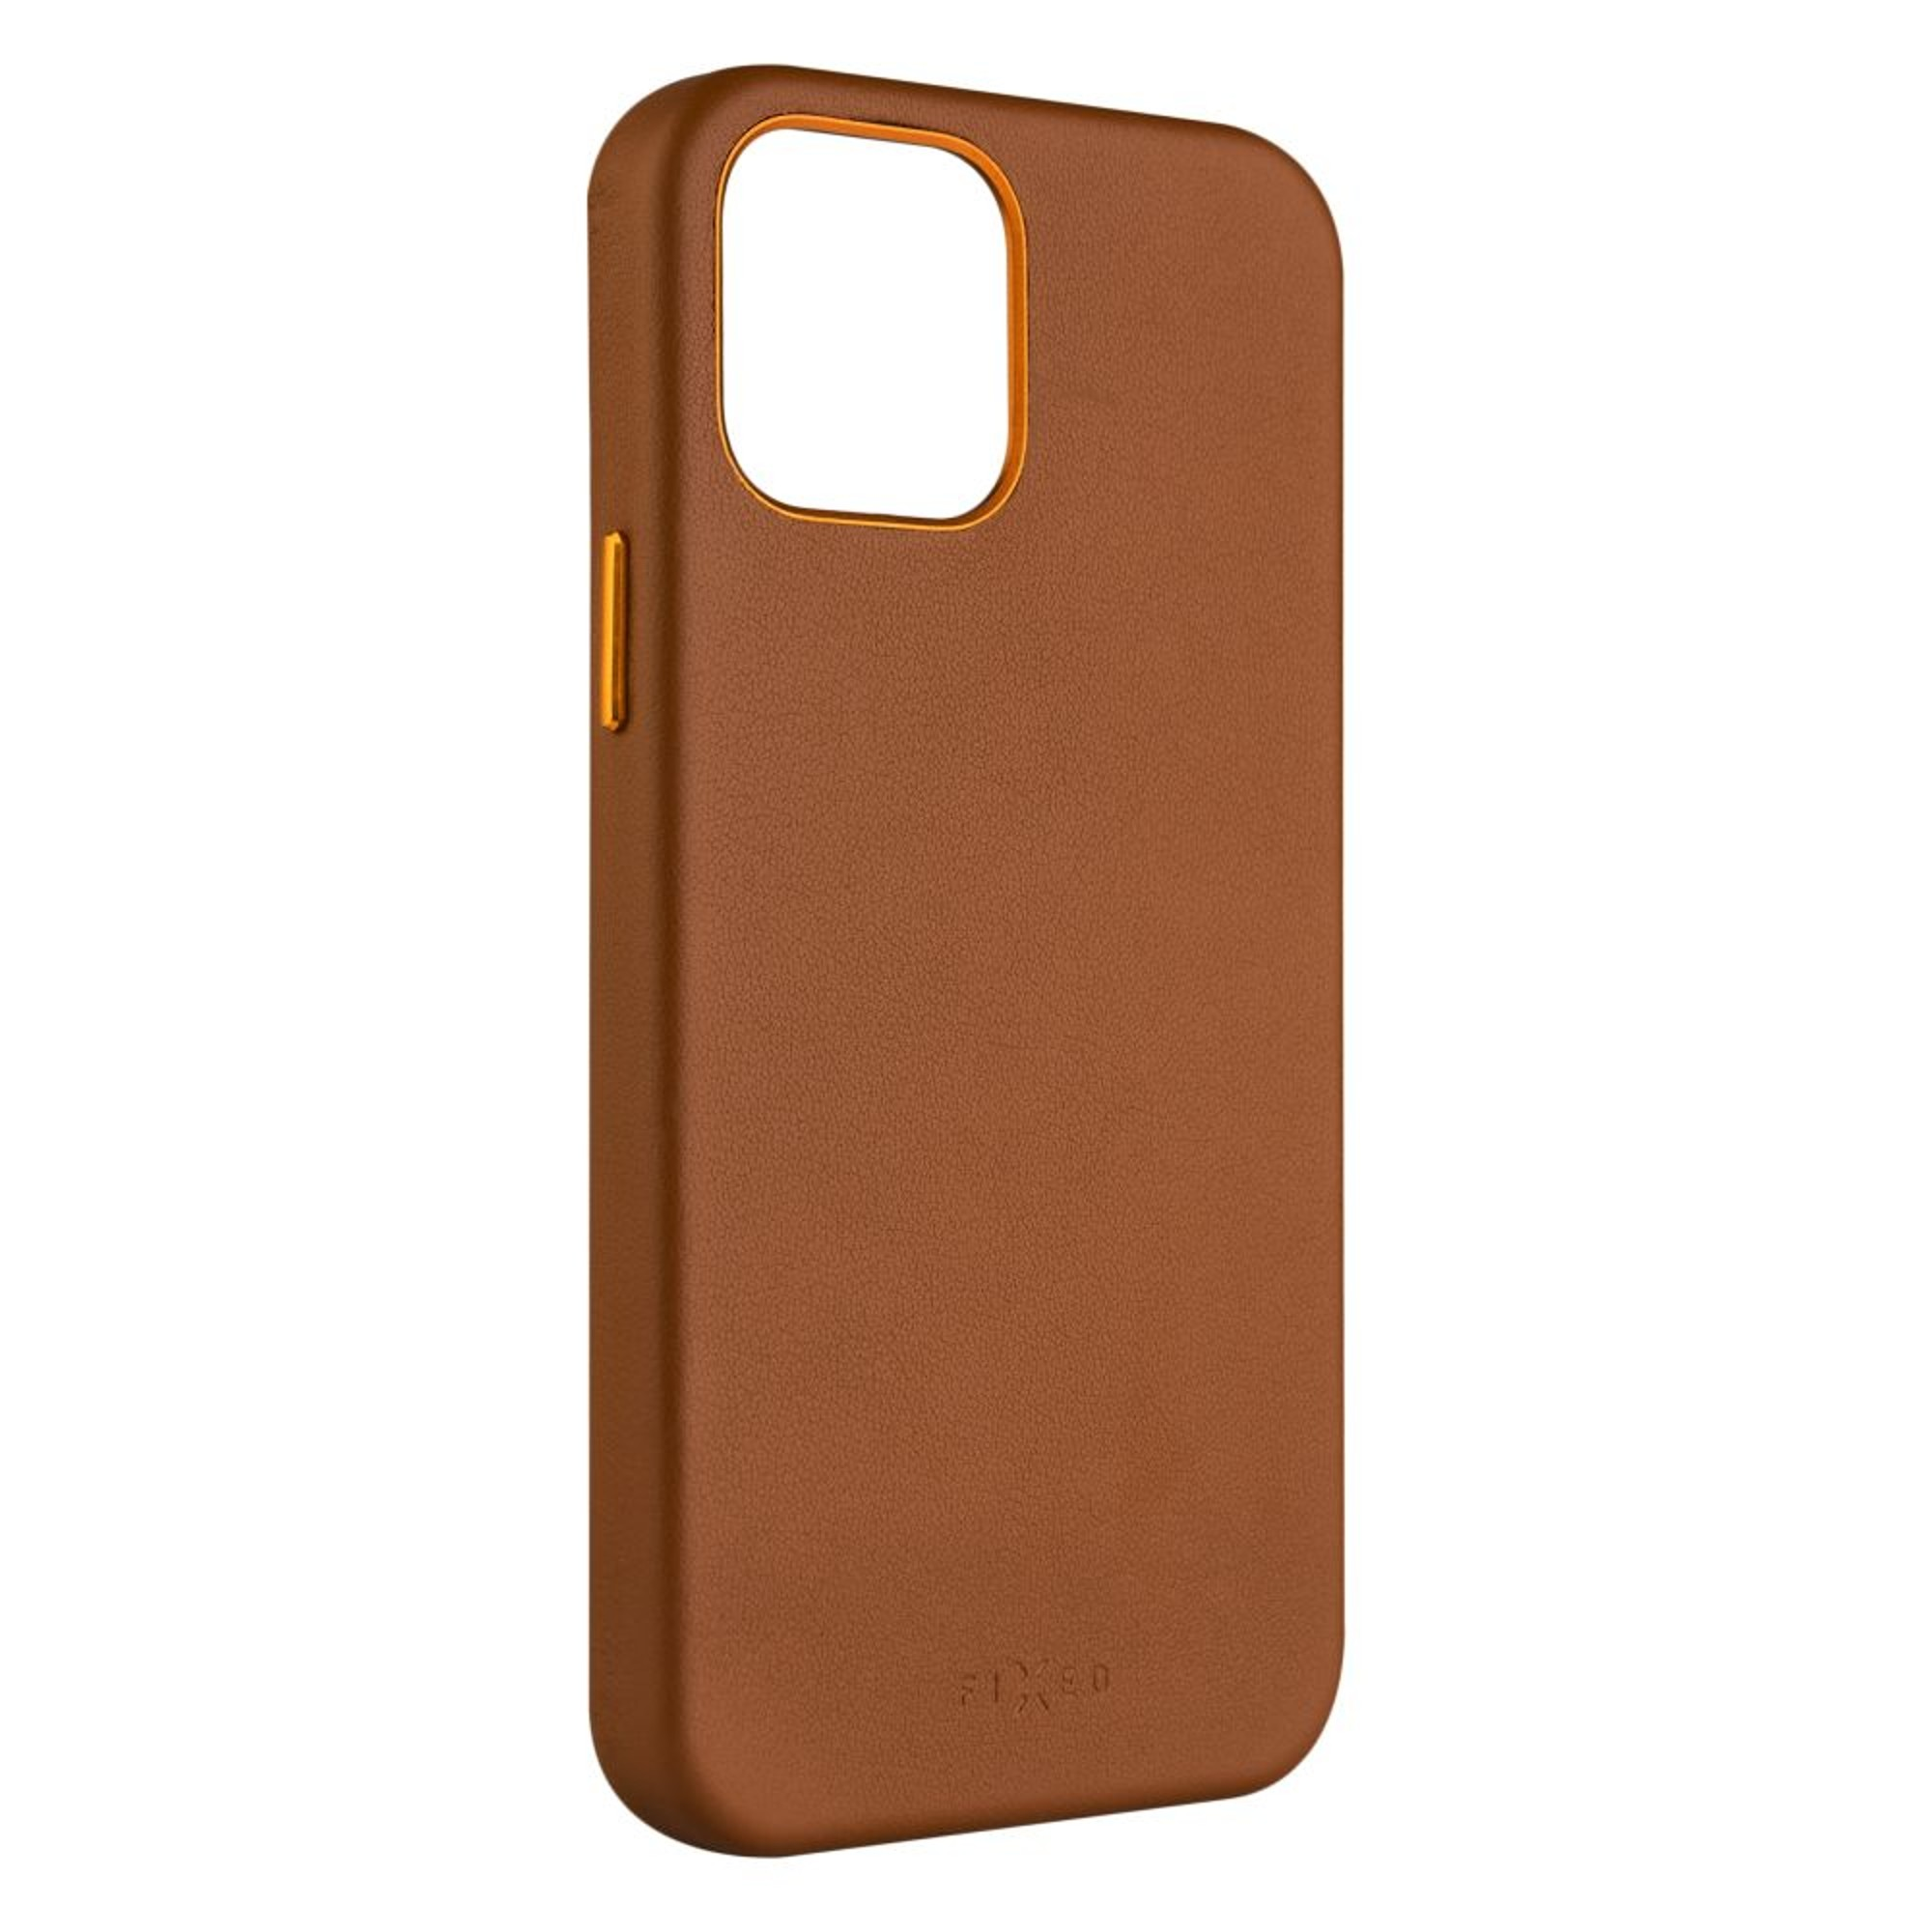 Apple, FIXED Braun Pro, FIXLM-793-BRW, iPhone 13 Backcover,